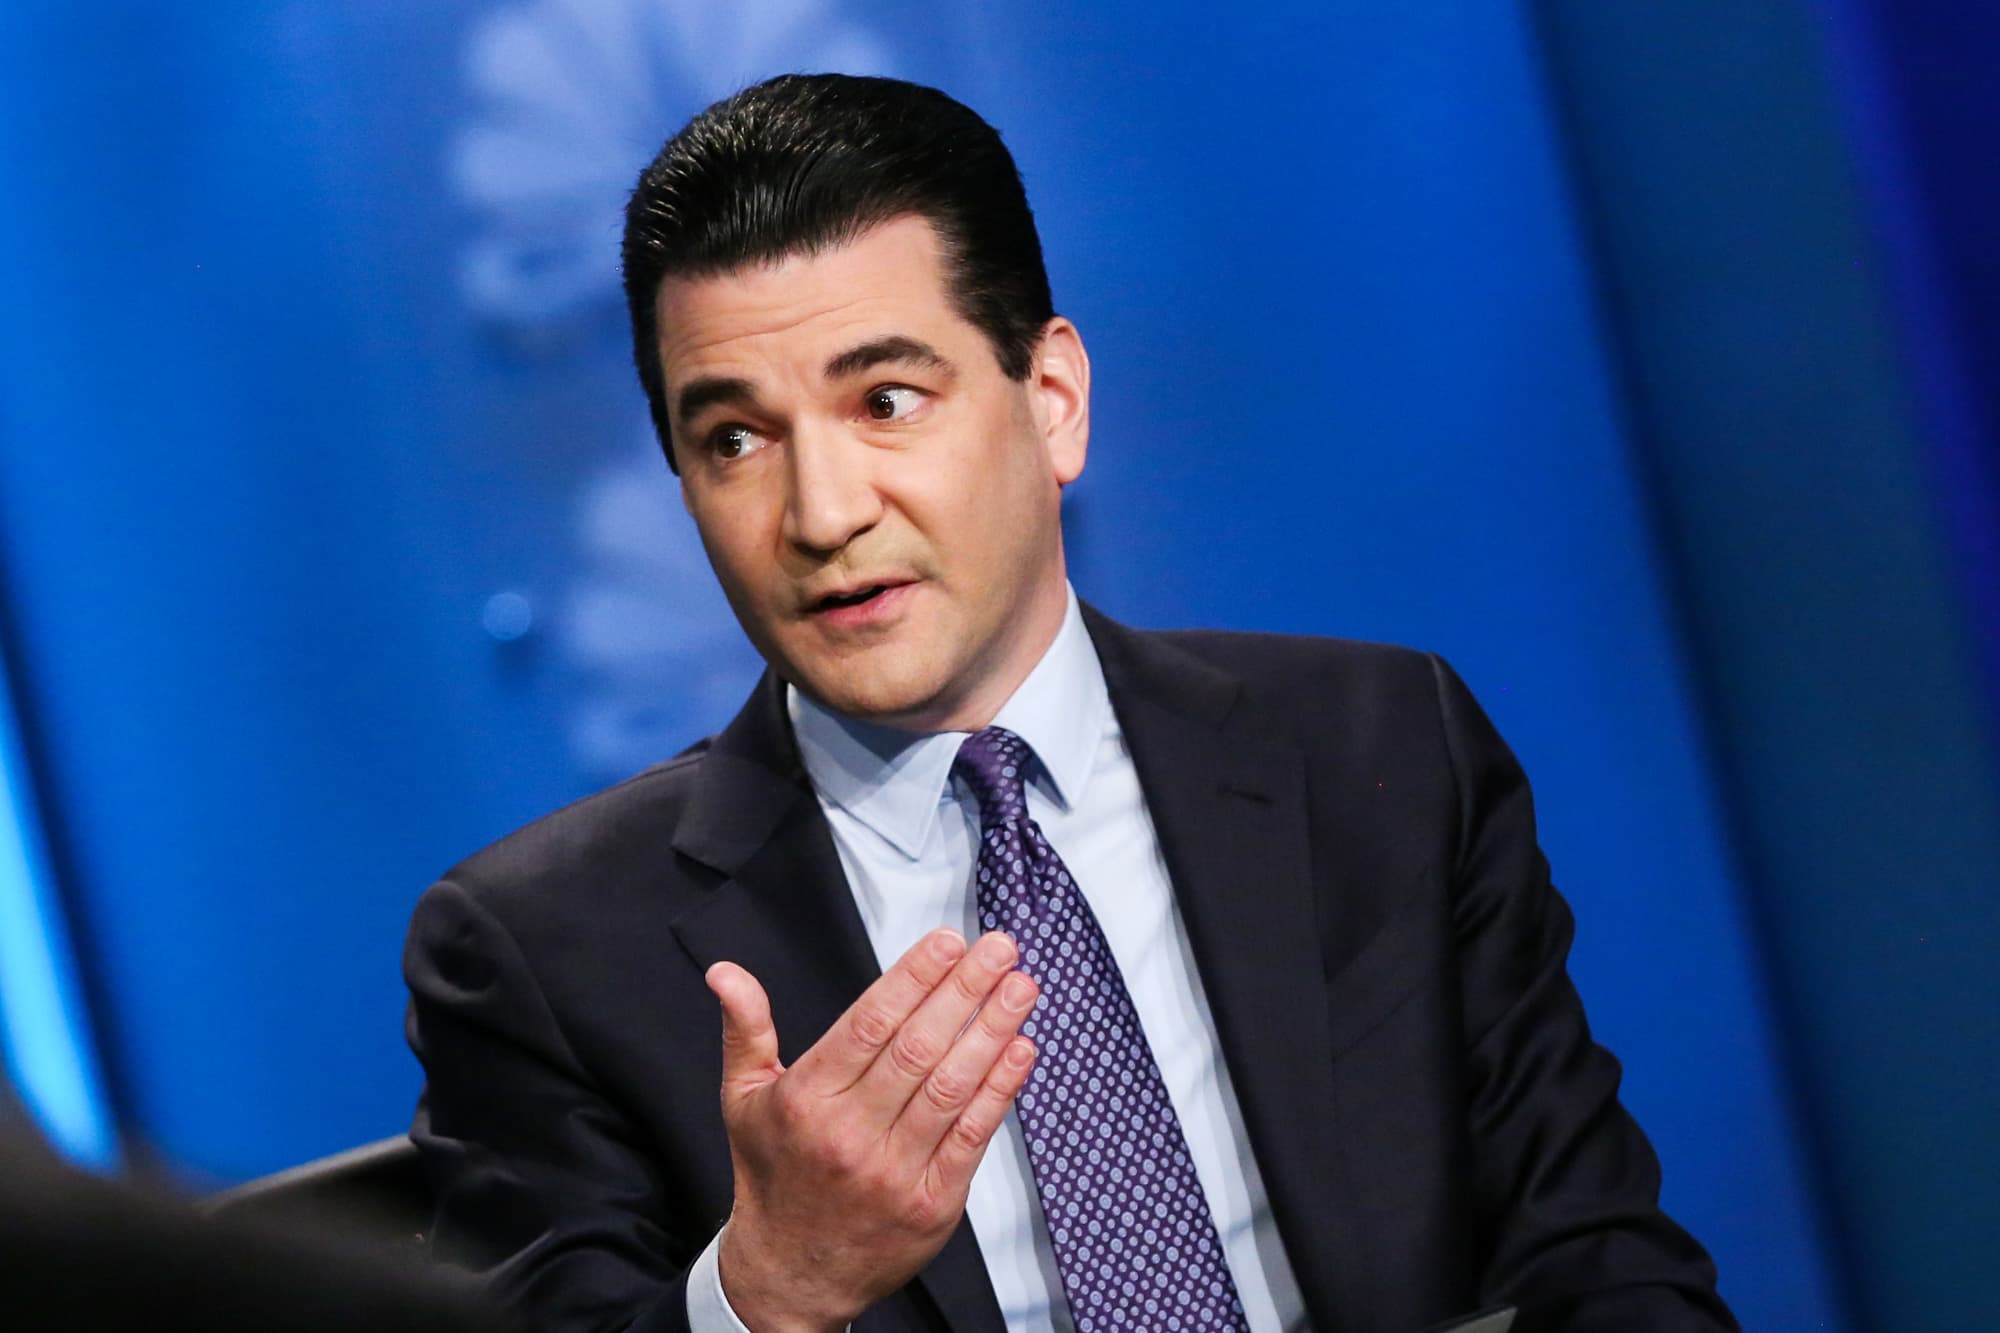 Dr. Scott Gottlieb says he’ll get his young kids Covid vaccinated as soon as they’re eligible – CNBC